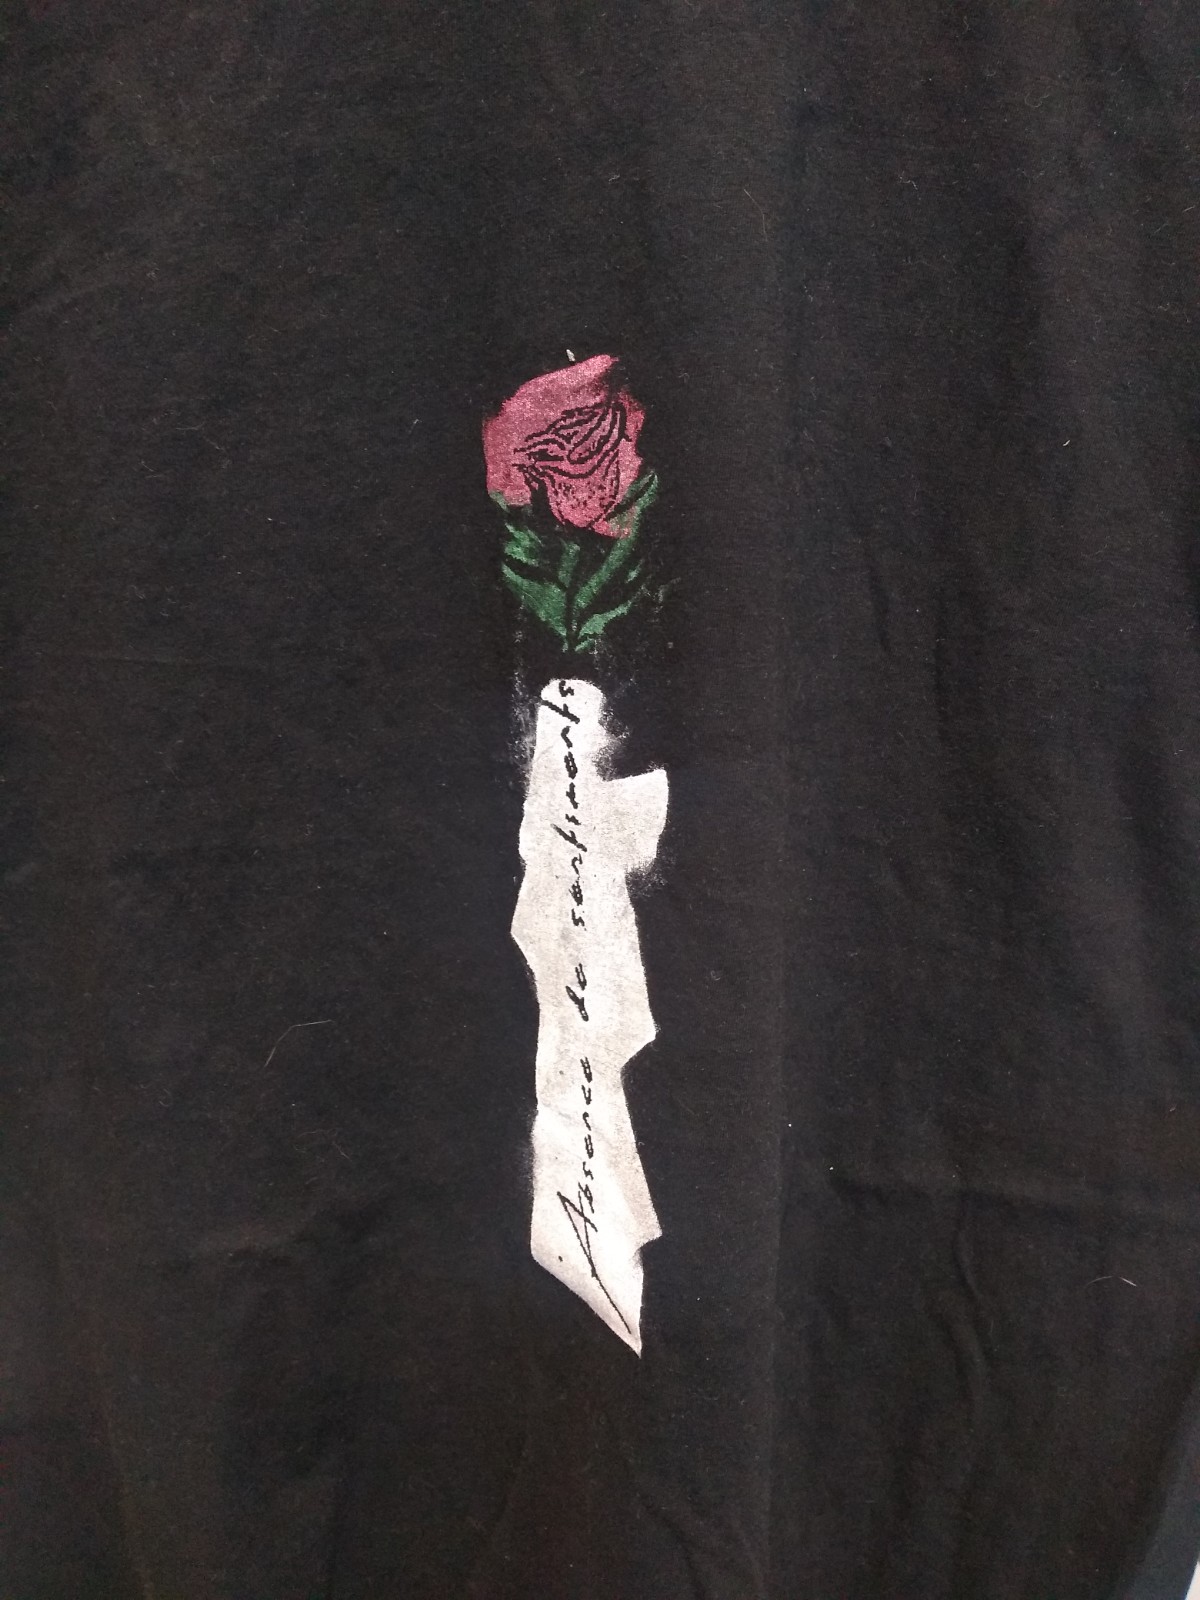 Red rose with green stem and text vertical reads Absence de sentiment with a brain attached to anatomical heart on black shirt.